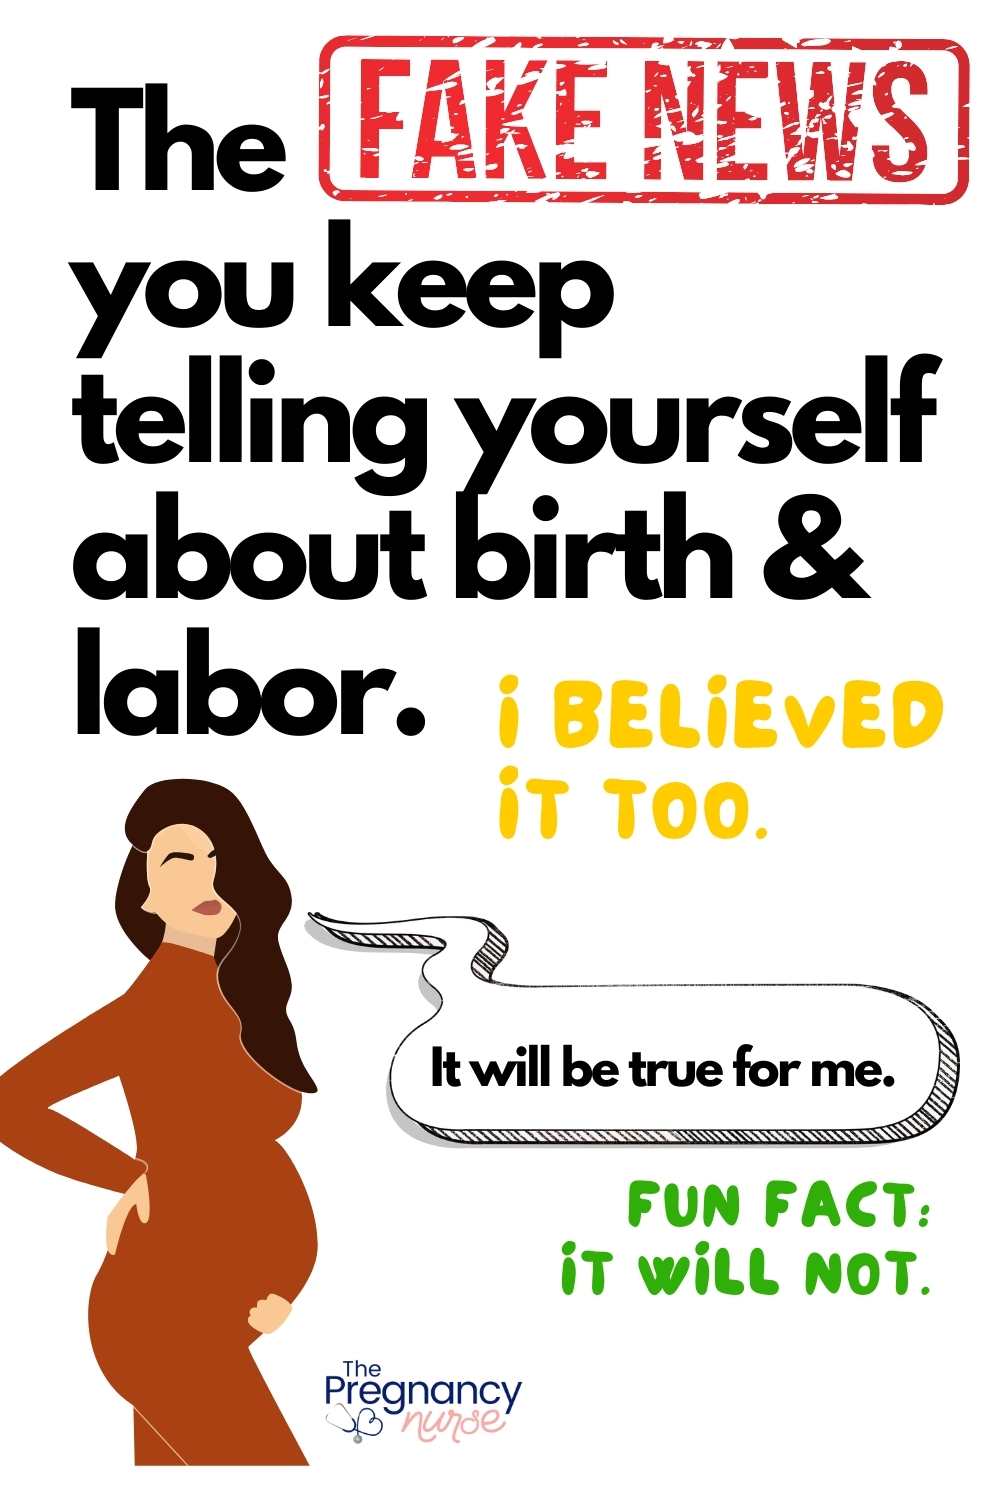 pregnant woman saying "it will be true for me" with the words "fun fact: it will not be" // the FAKE NEWS you keep telling yourself about birth & Labor / I believed it too!